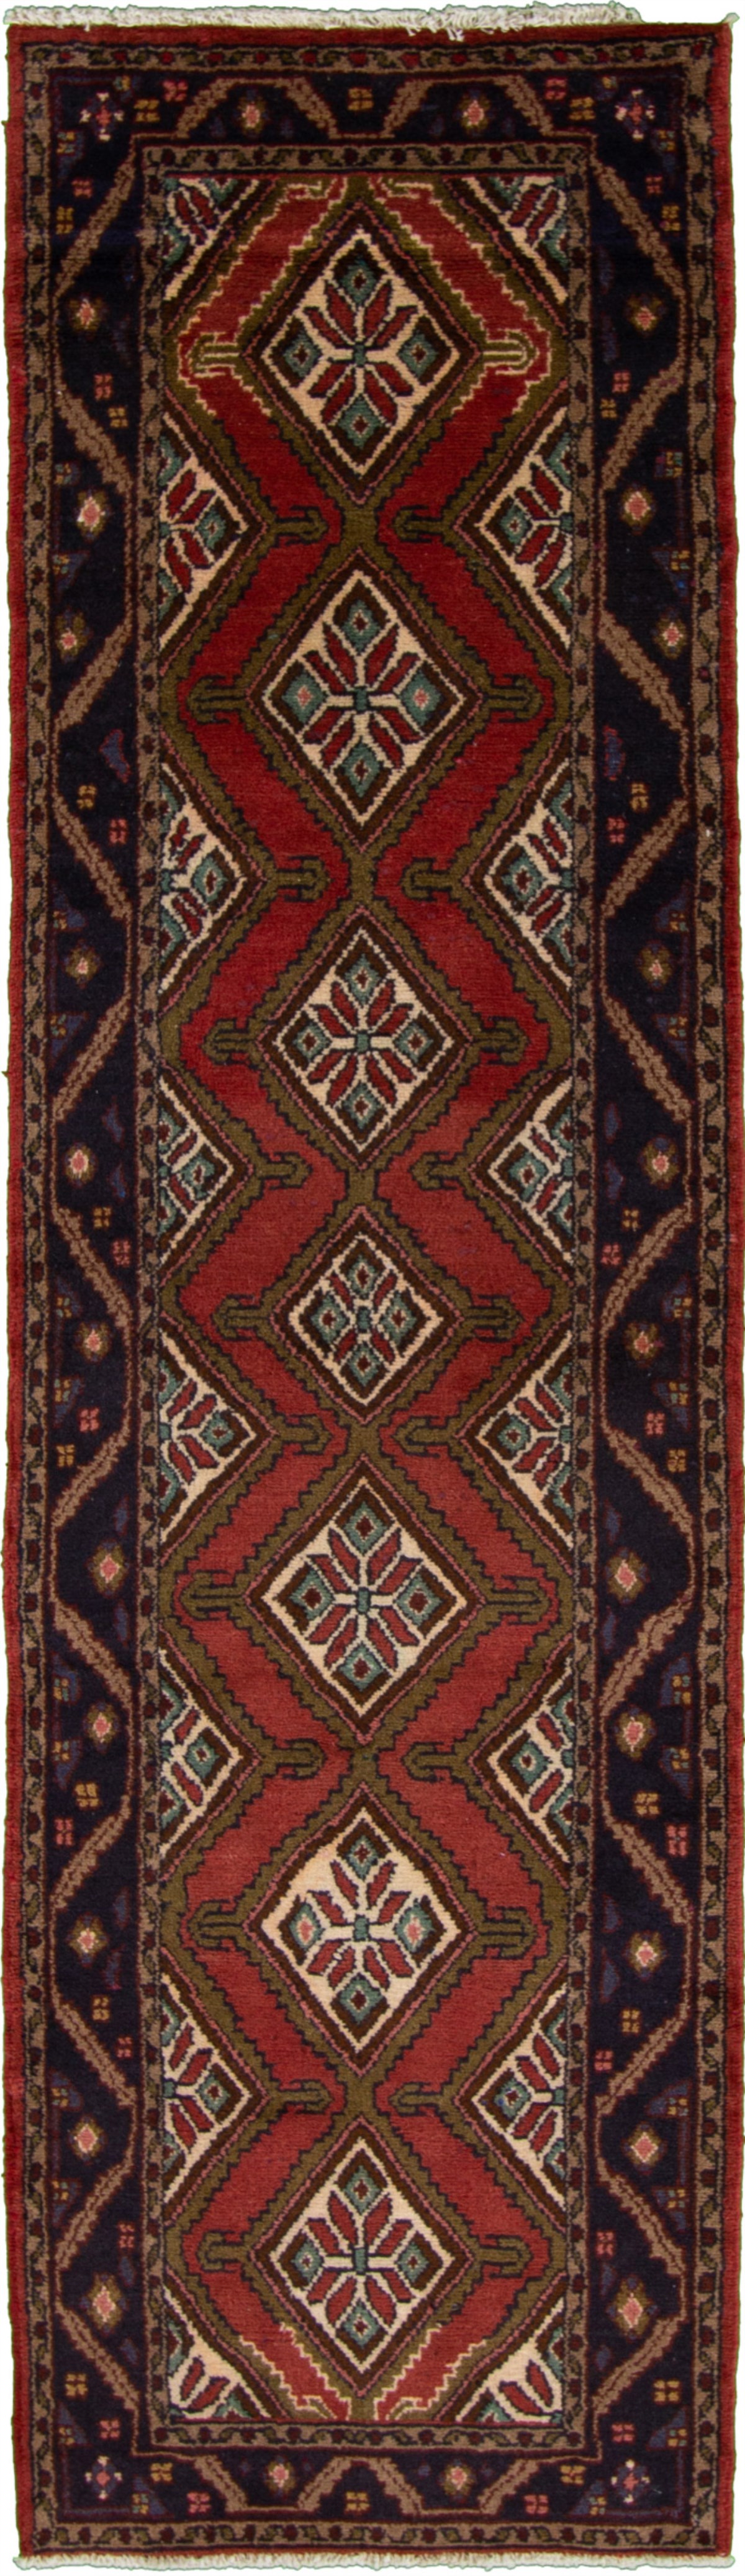 Hand-knotted Koliai Red Wool Rug 2'8" x 9'6"  Size: 2'8" x 9'6"  